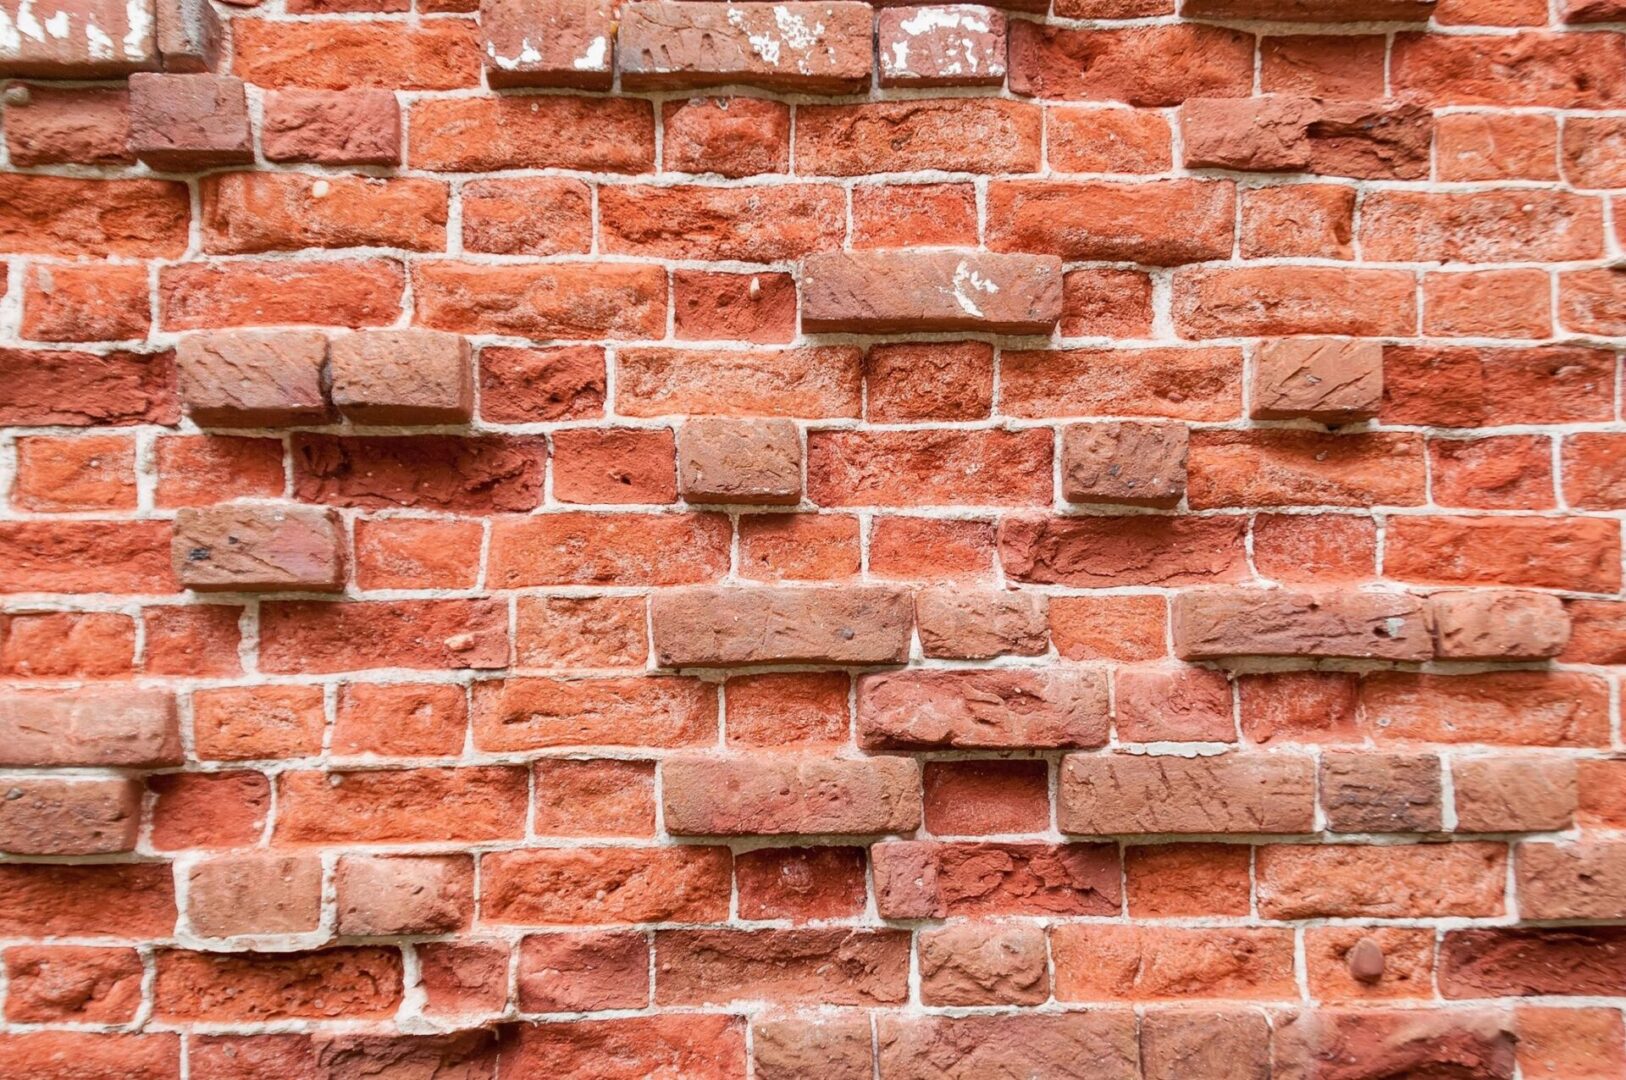 A close up of a red brick wall.